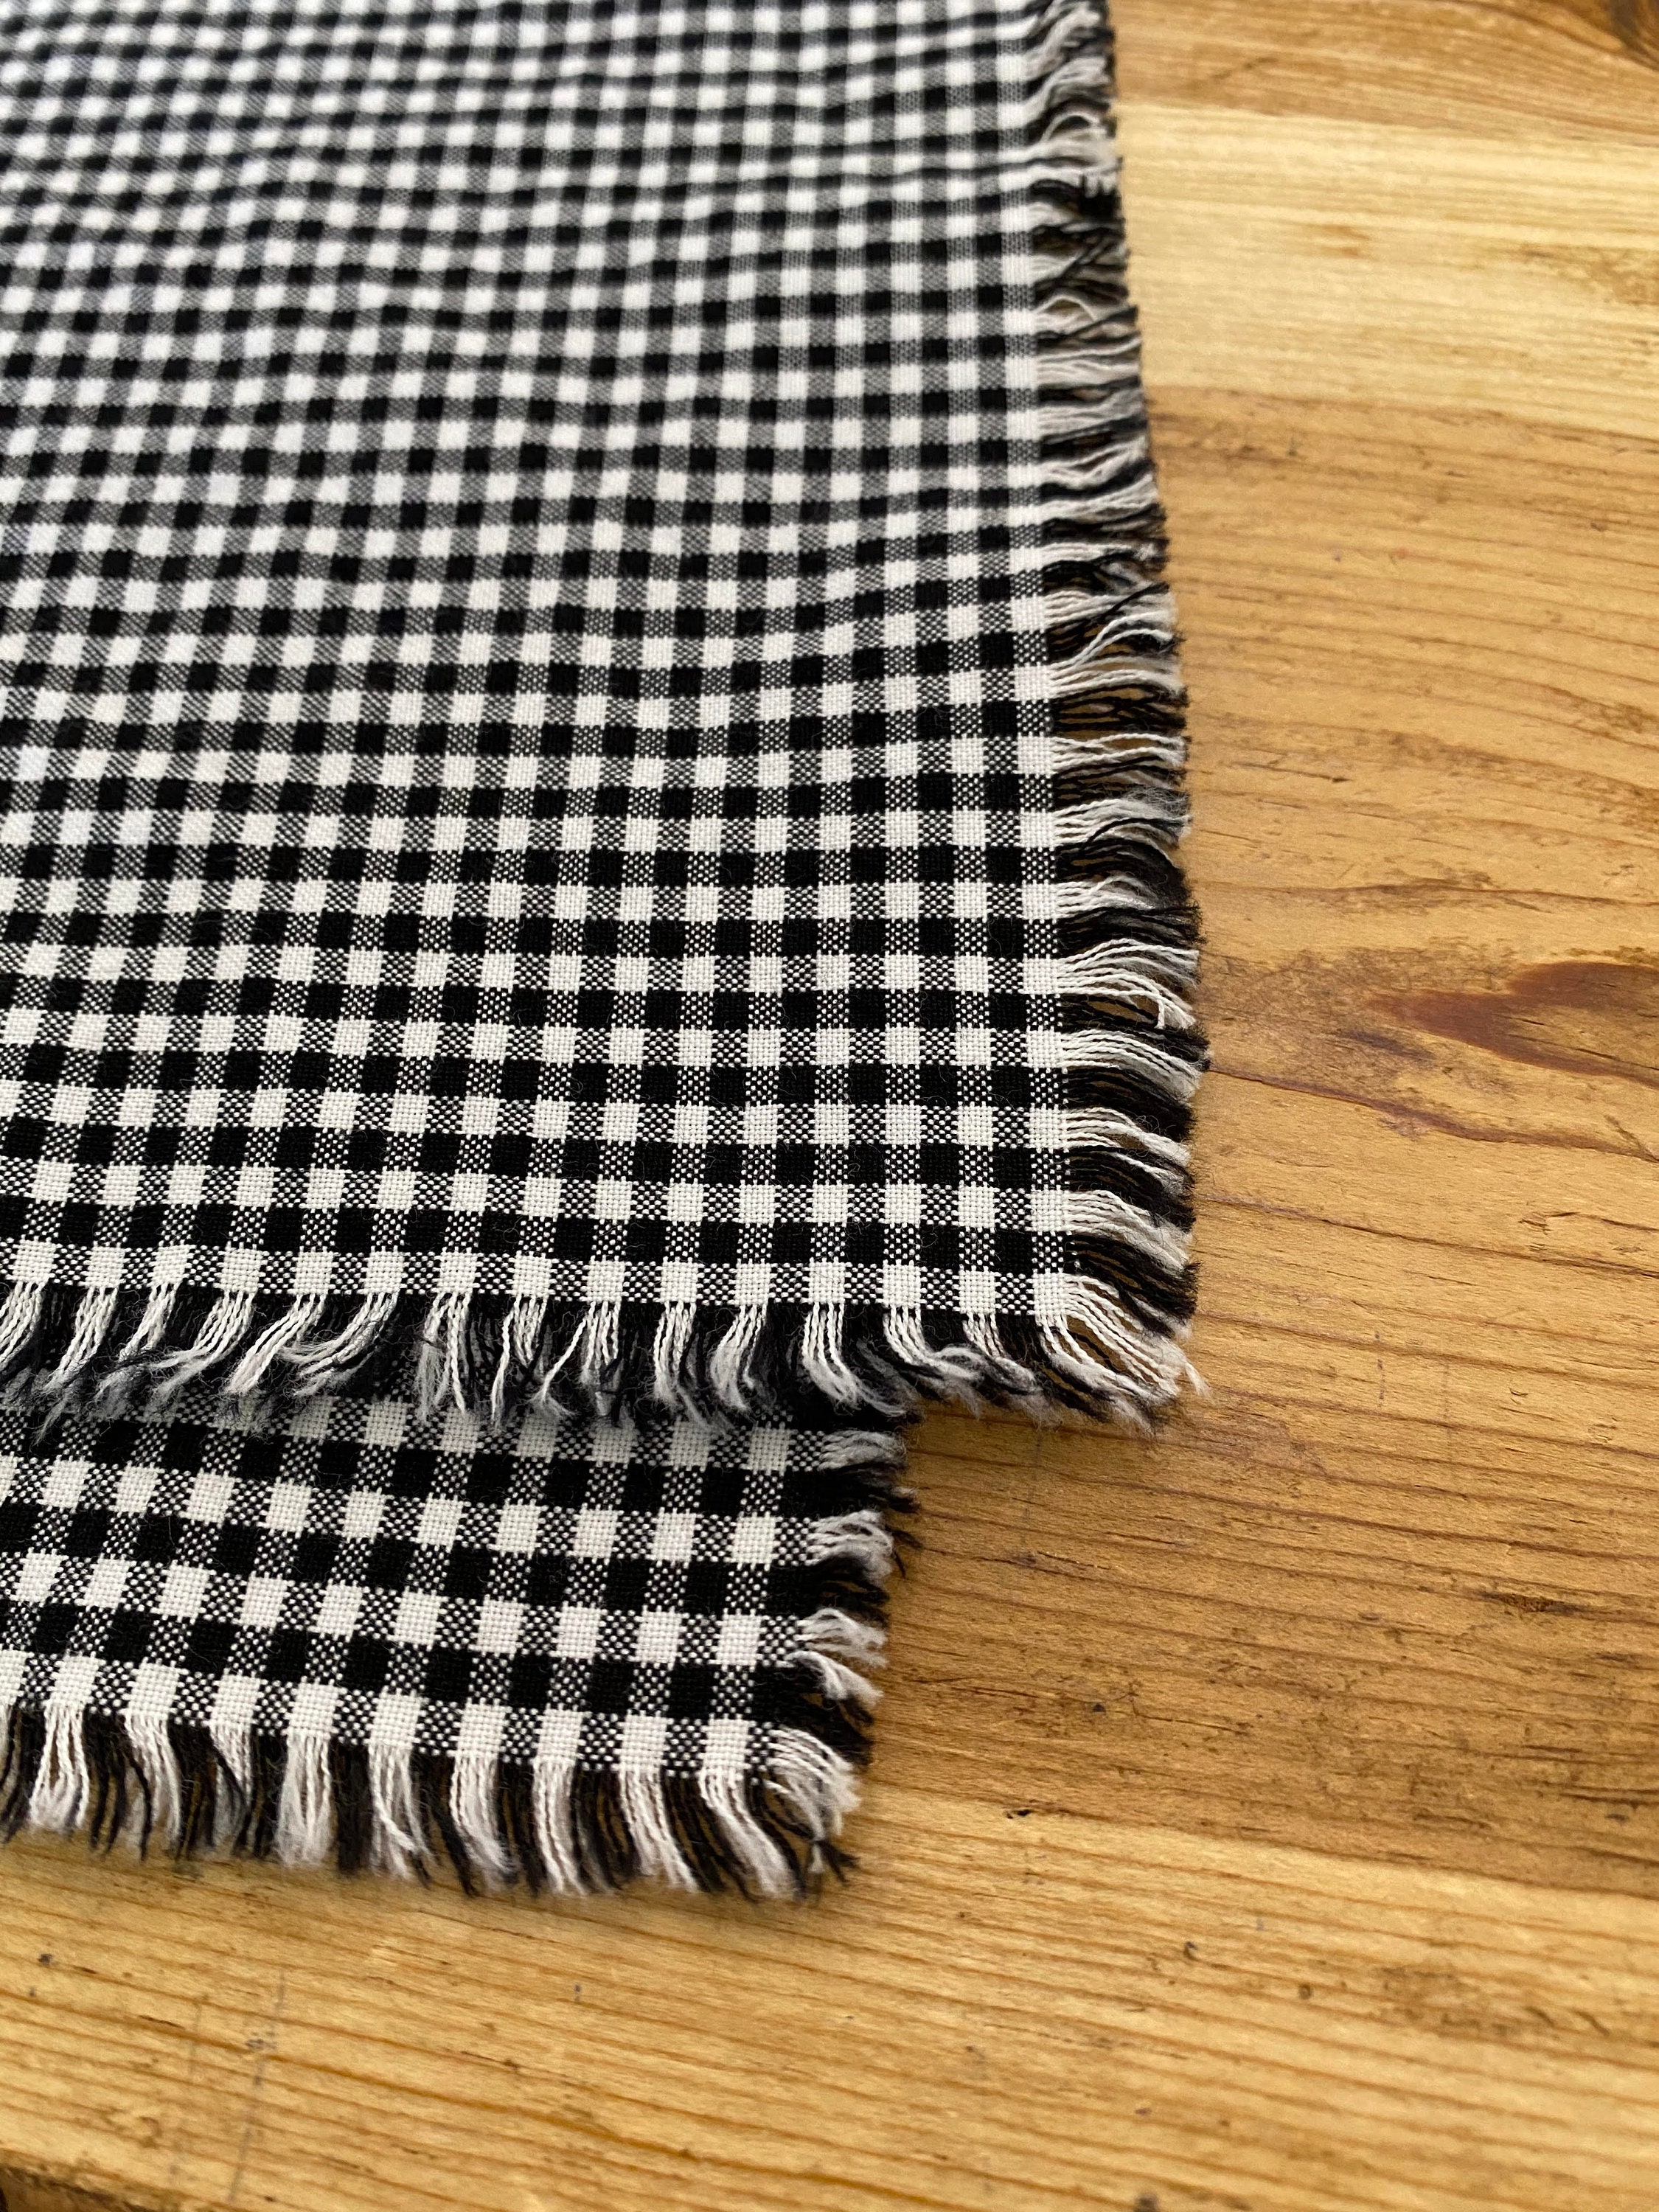 Black and White Gingham Cloth Napkins Weddings Parties | Etsy